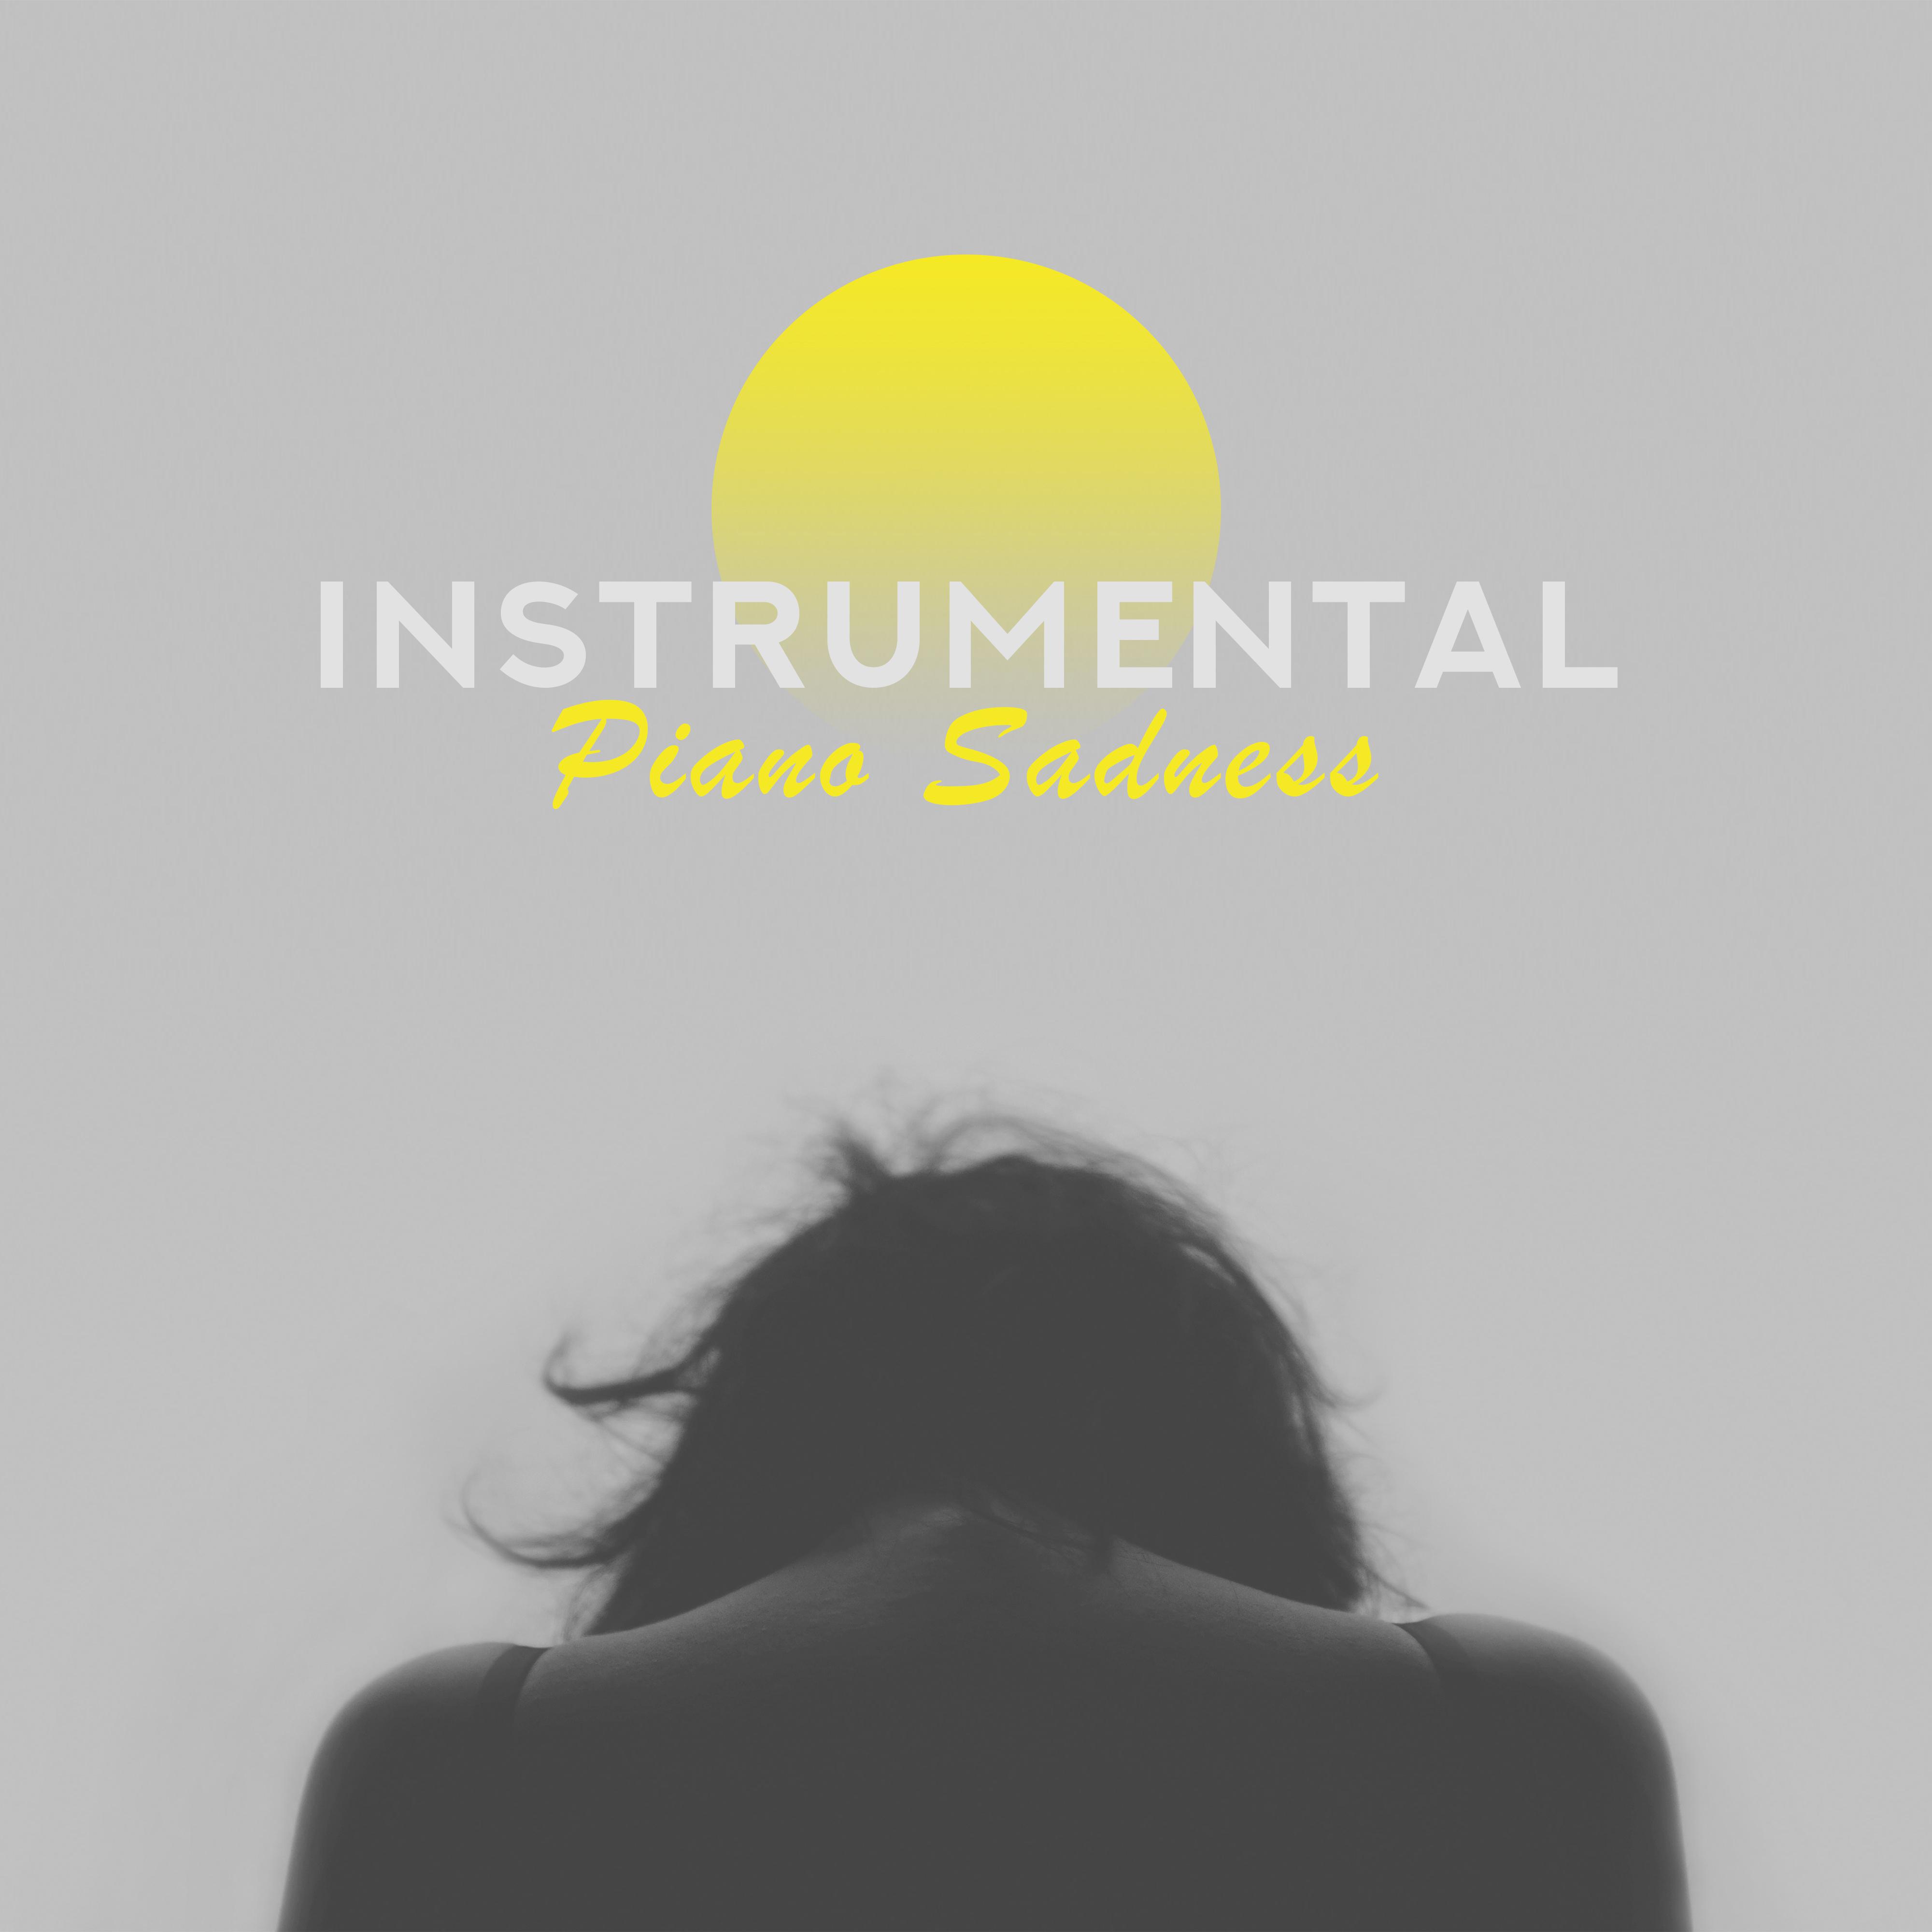 Instrumental Piano Sadness: 2019 Piano Jazz Music, Slow Sad Melodies for Lonely Evenings when You Miss Someone Special